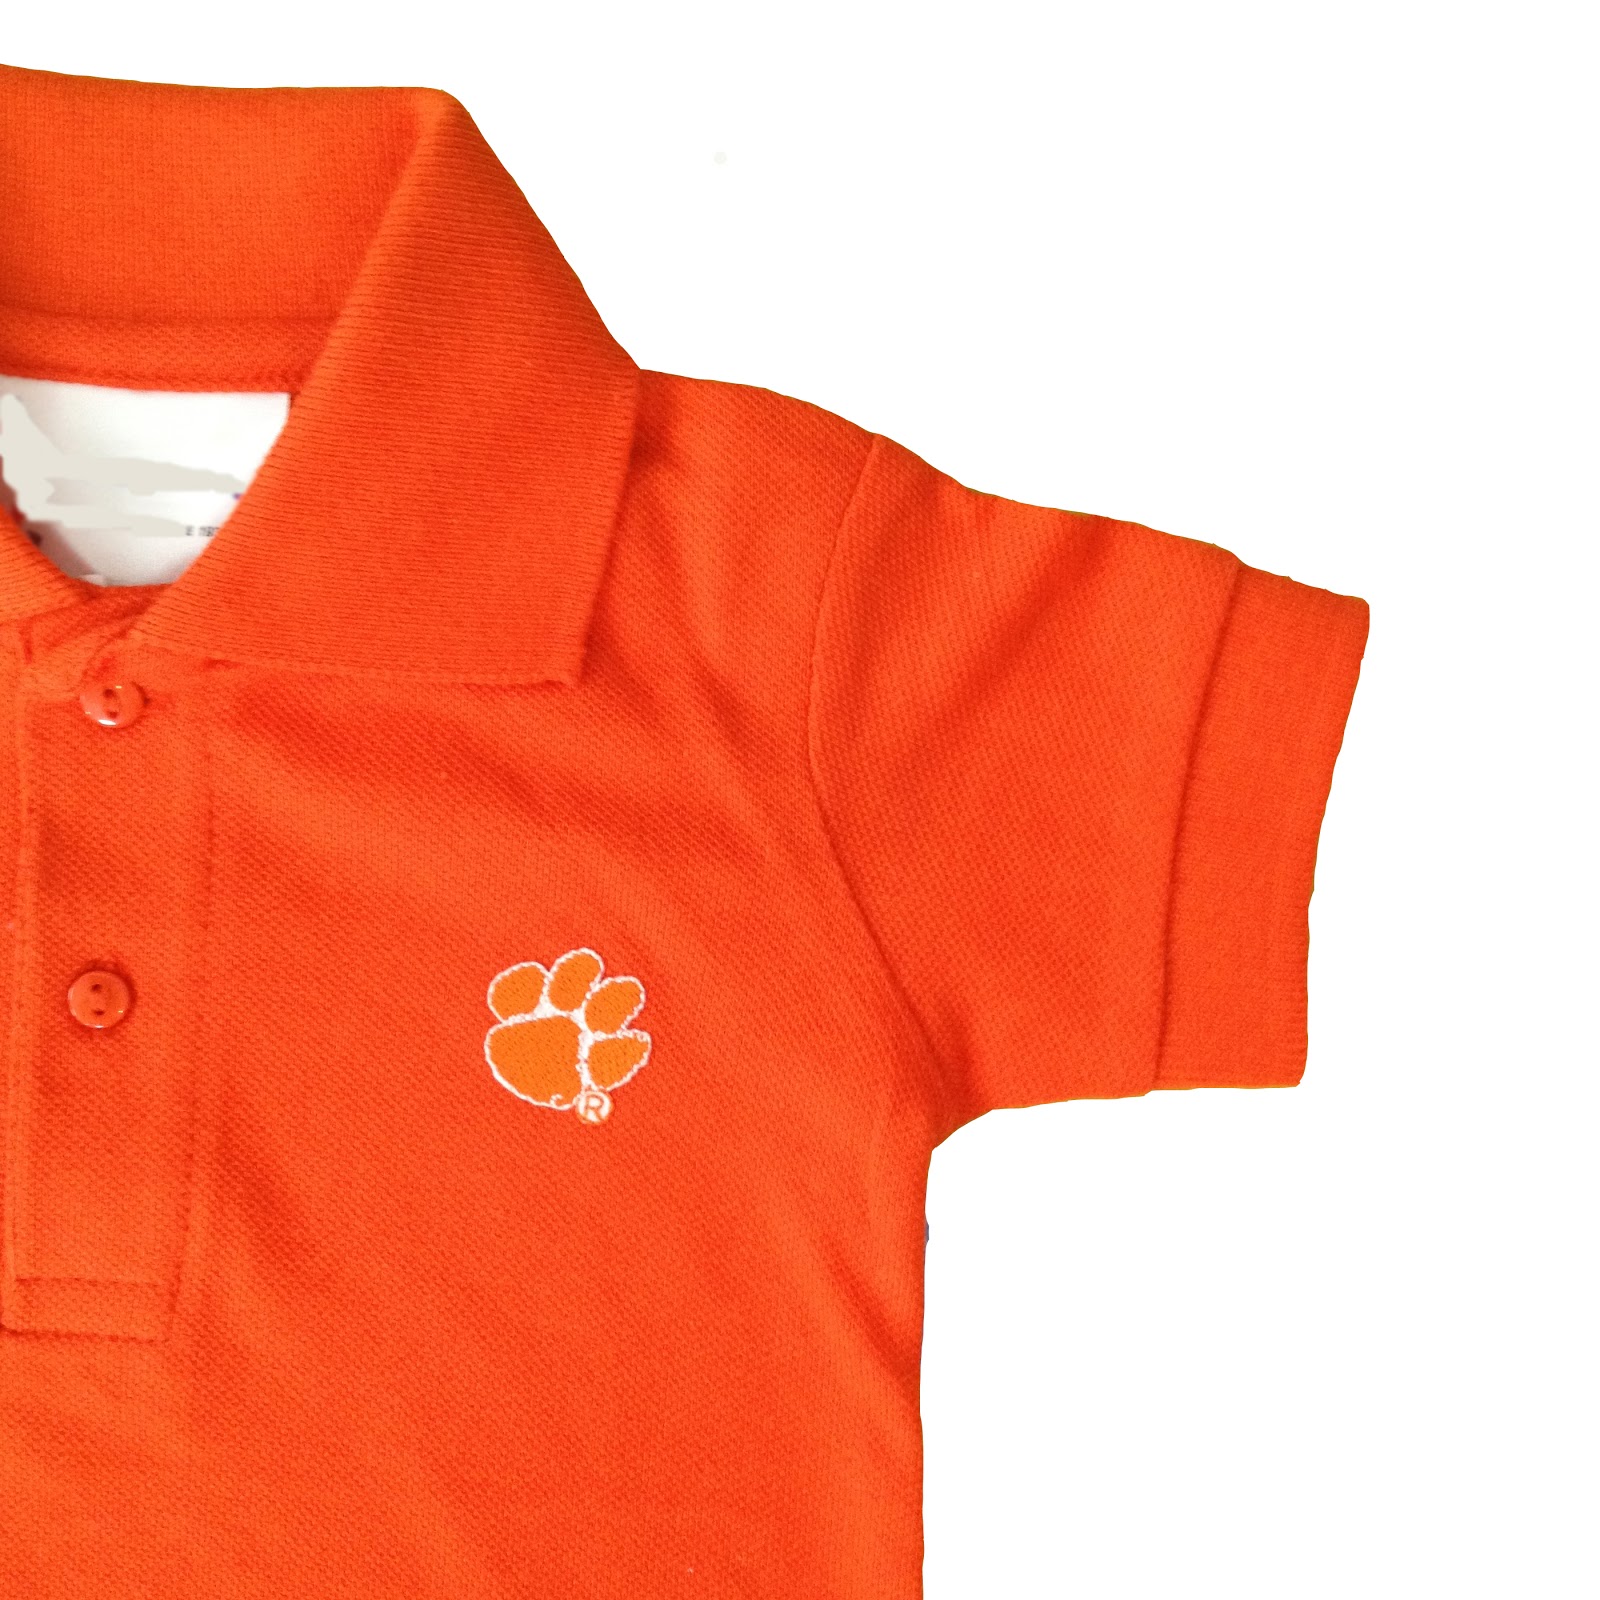 Clemson Girl: Win a Clemson baby polo romper from Tailgate Tots